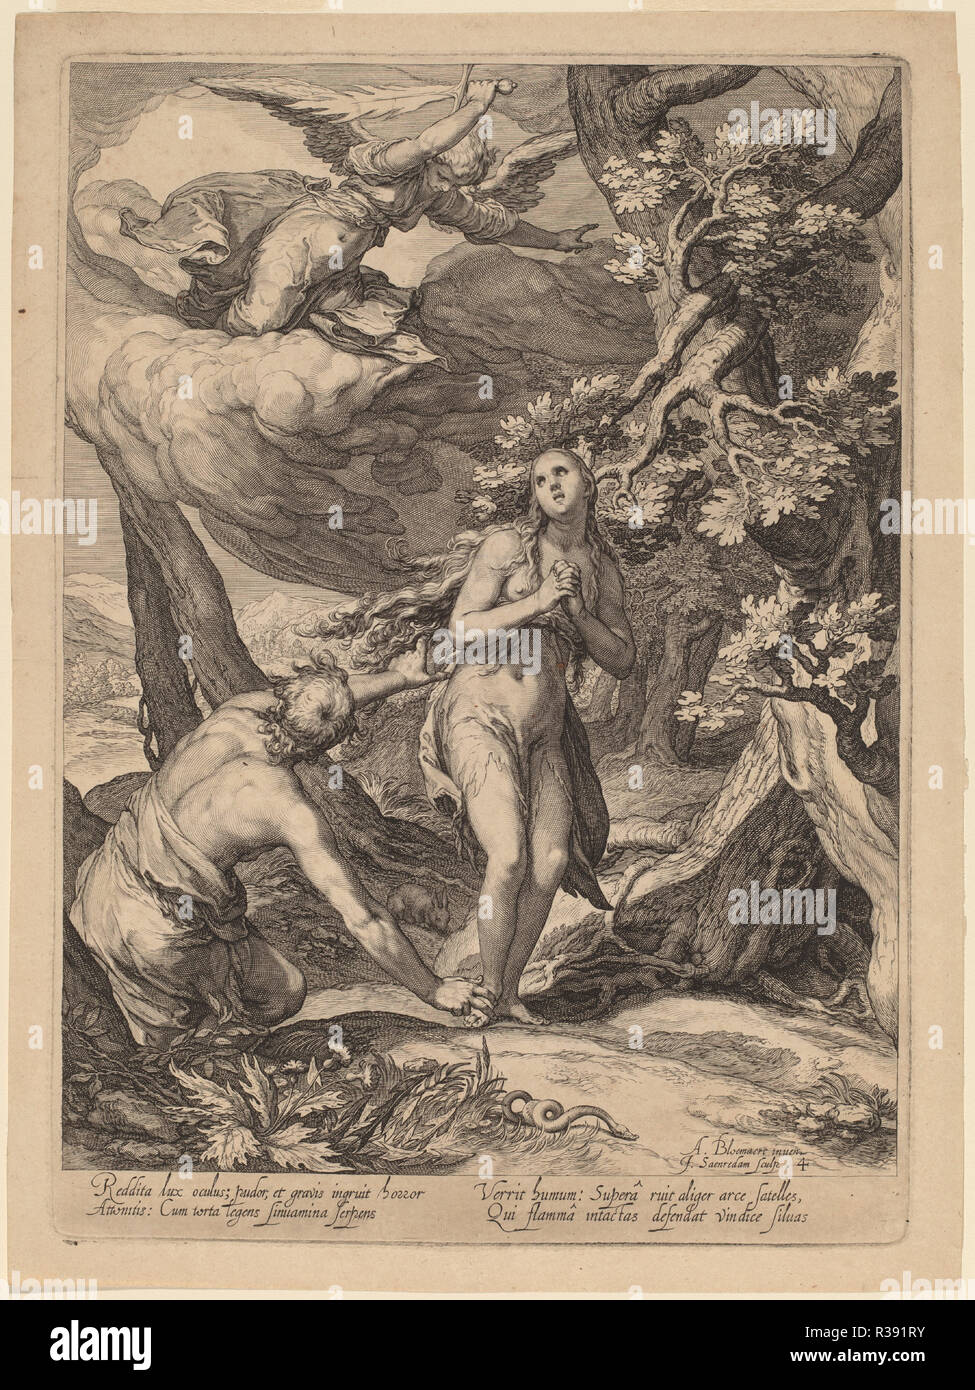 Expulsion from Eden. Dated: 1604. Dimensions: plate: 27.5 x 19.9 cm (10 13/16 x 7 13/16 in.)  sheet: 29.5 x 22.2 cm (11 5/8 x 8 3/4 in.). Medium: engraving on laid paper. Museum: National Gallery of Art, Washington DC. Author: Jan Pietersz Saenredam after Abraham Bloemaert. Stock Photo